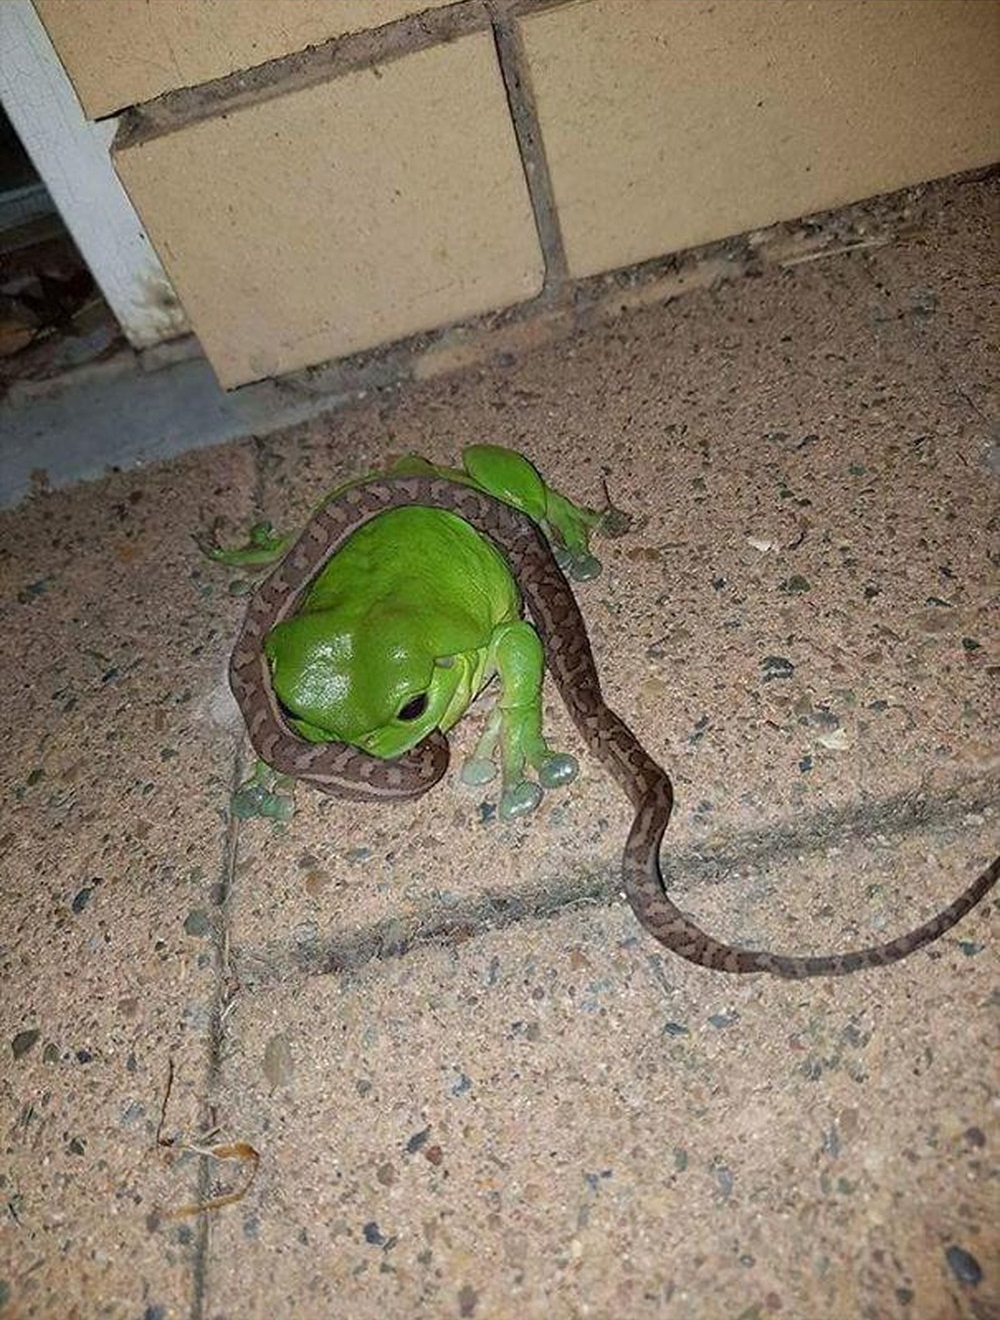 The frog ate a snake